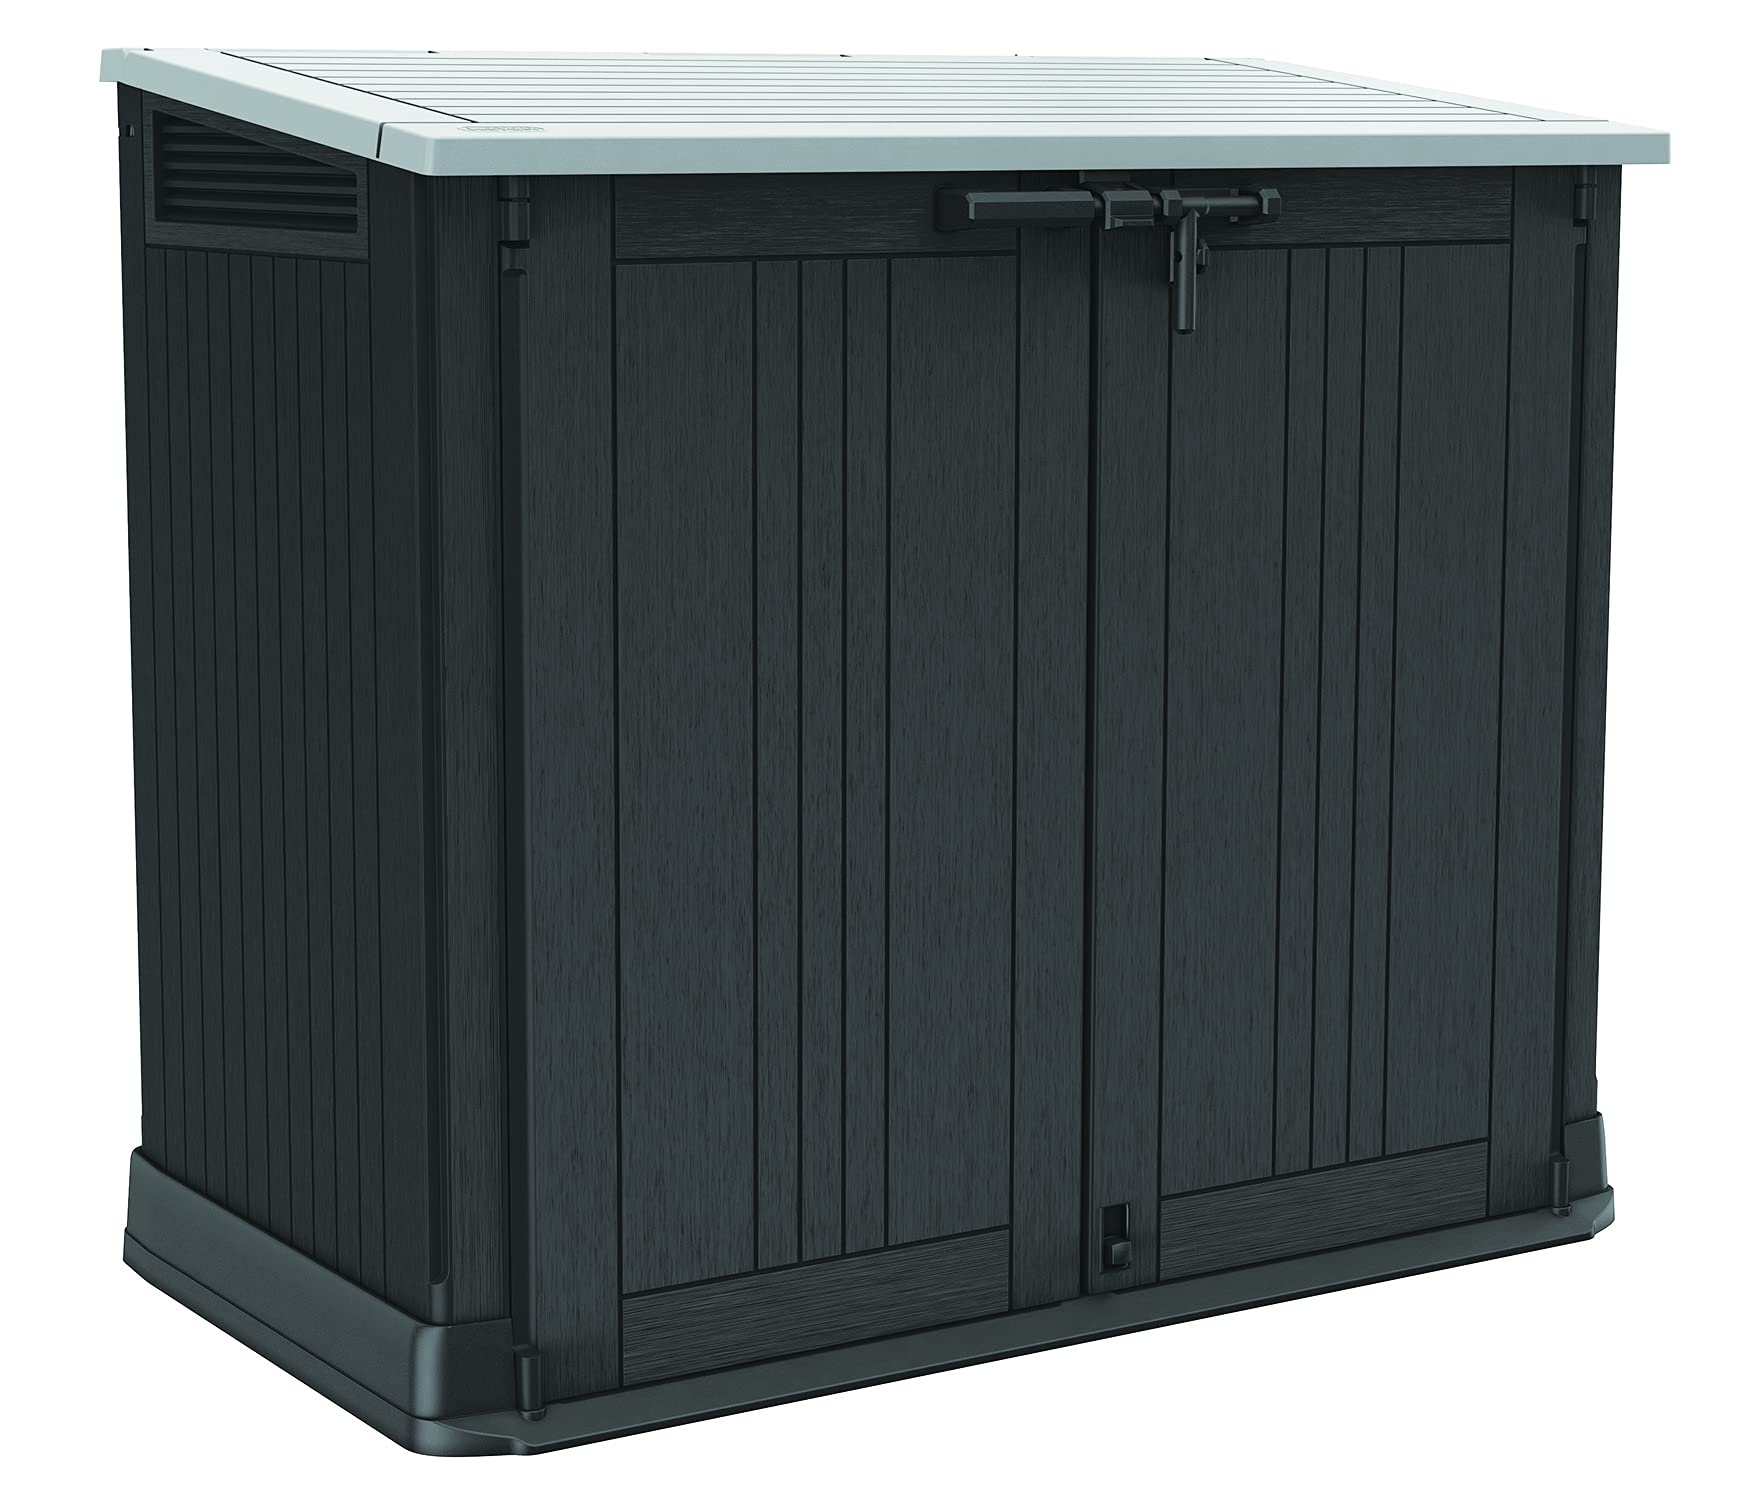 Keter Store-It-Out Prime 4.3 X 2.3 Foot Resin Outdoor Storage Shed With Easy Lift Hinges, Perfect For Trash Cans, Yard Tools, An